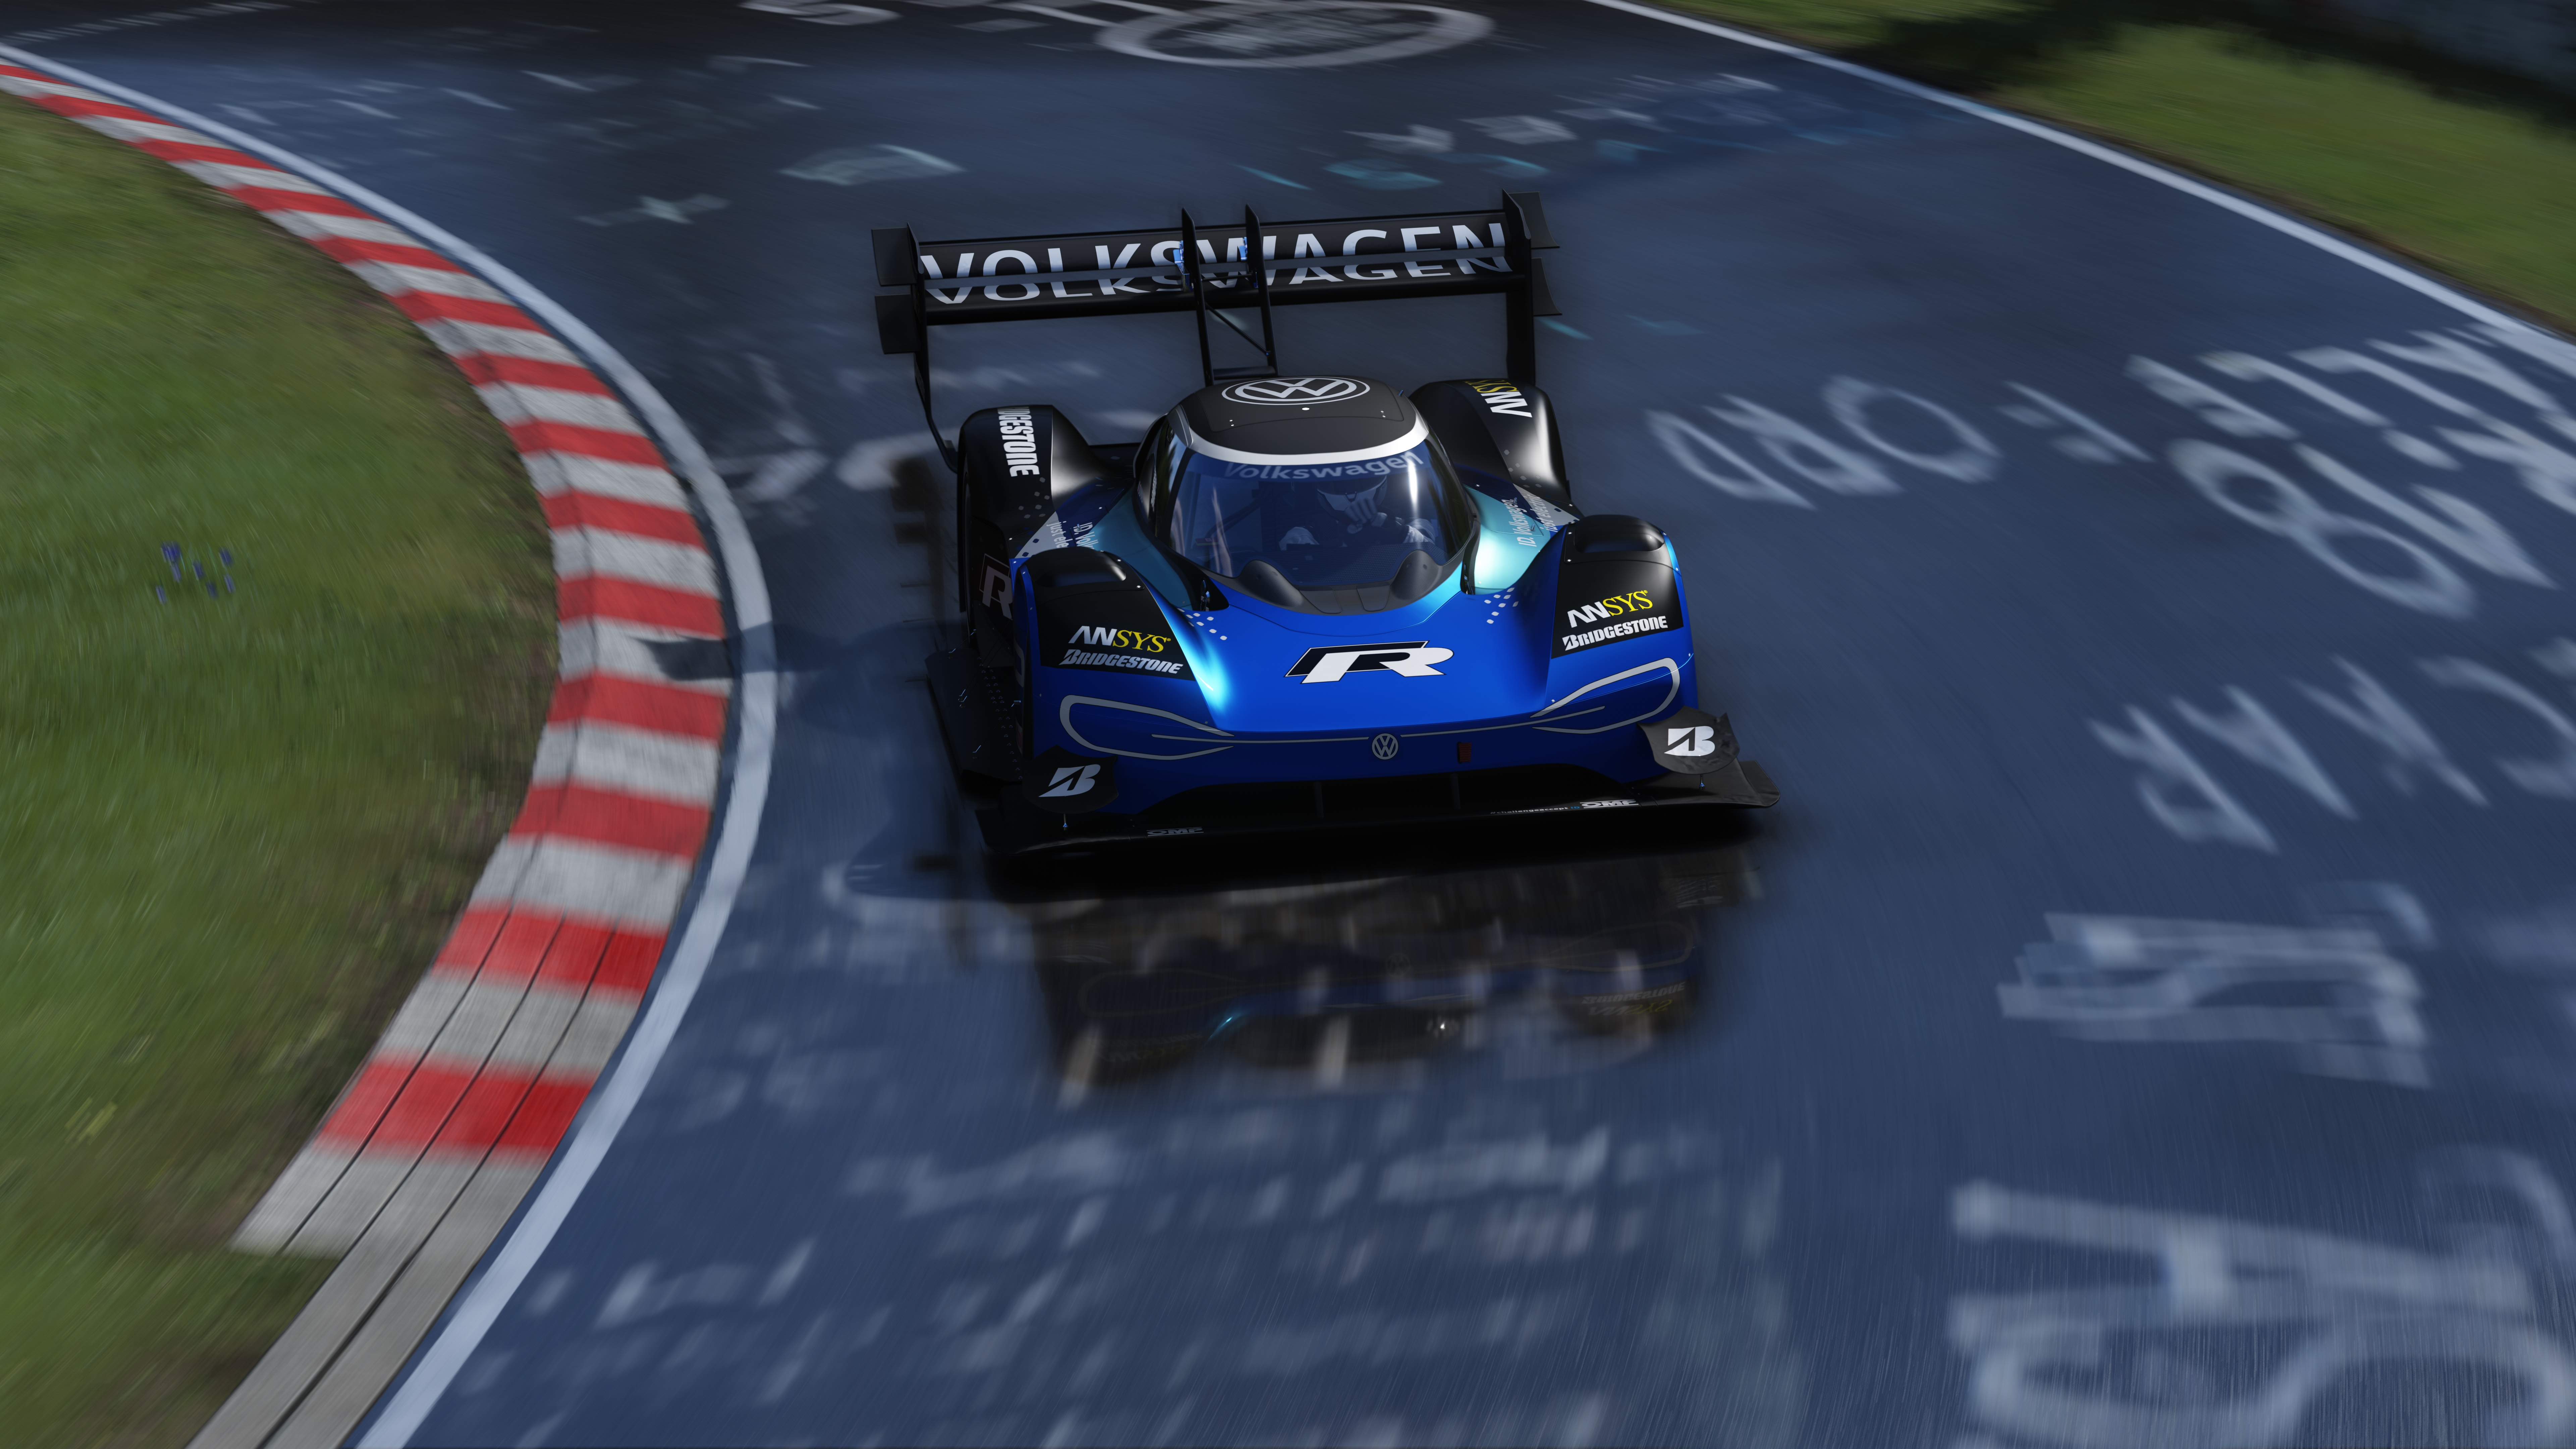 Volkswagen Volkswagen ID R Nurburgring Assetto Corsa Sunny After Rain Race Cars PC Gaming German Car 7680x4320